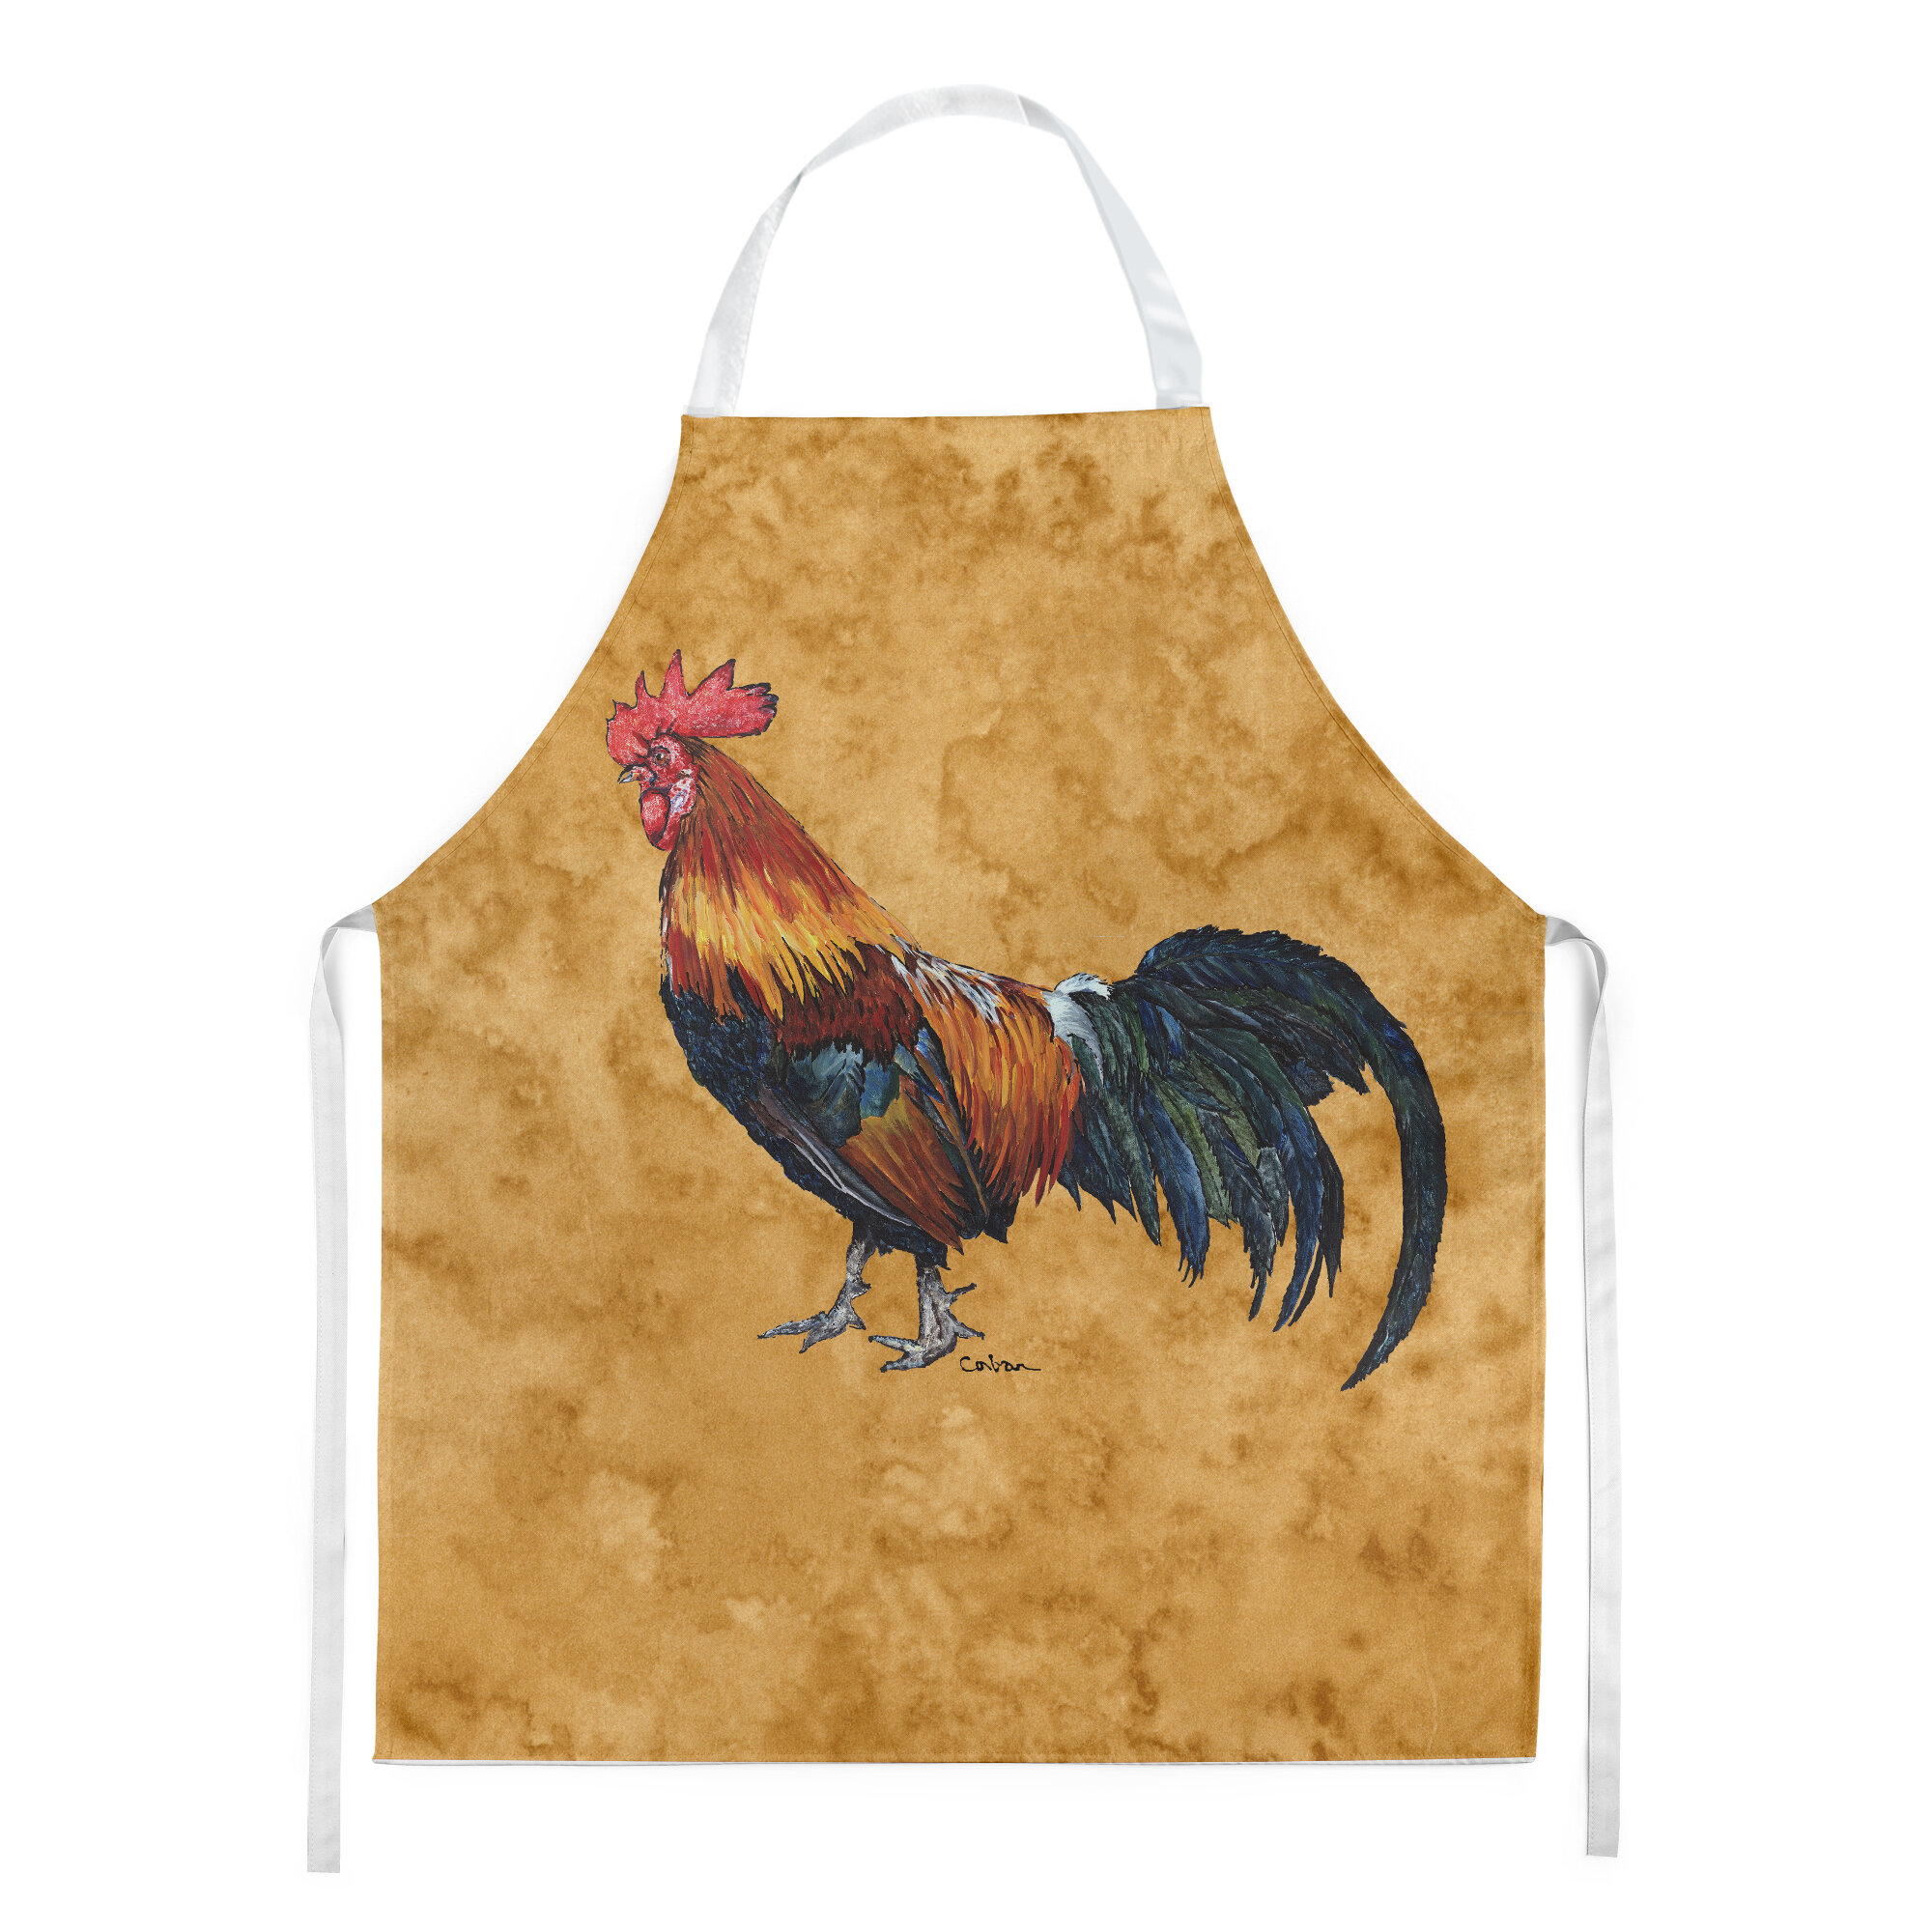 BRAND NEW Rooster Adjustable Neck Waist Ties Full Apron